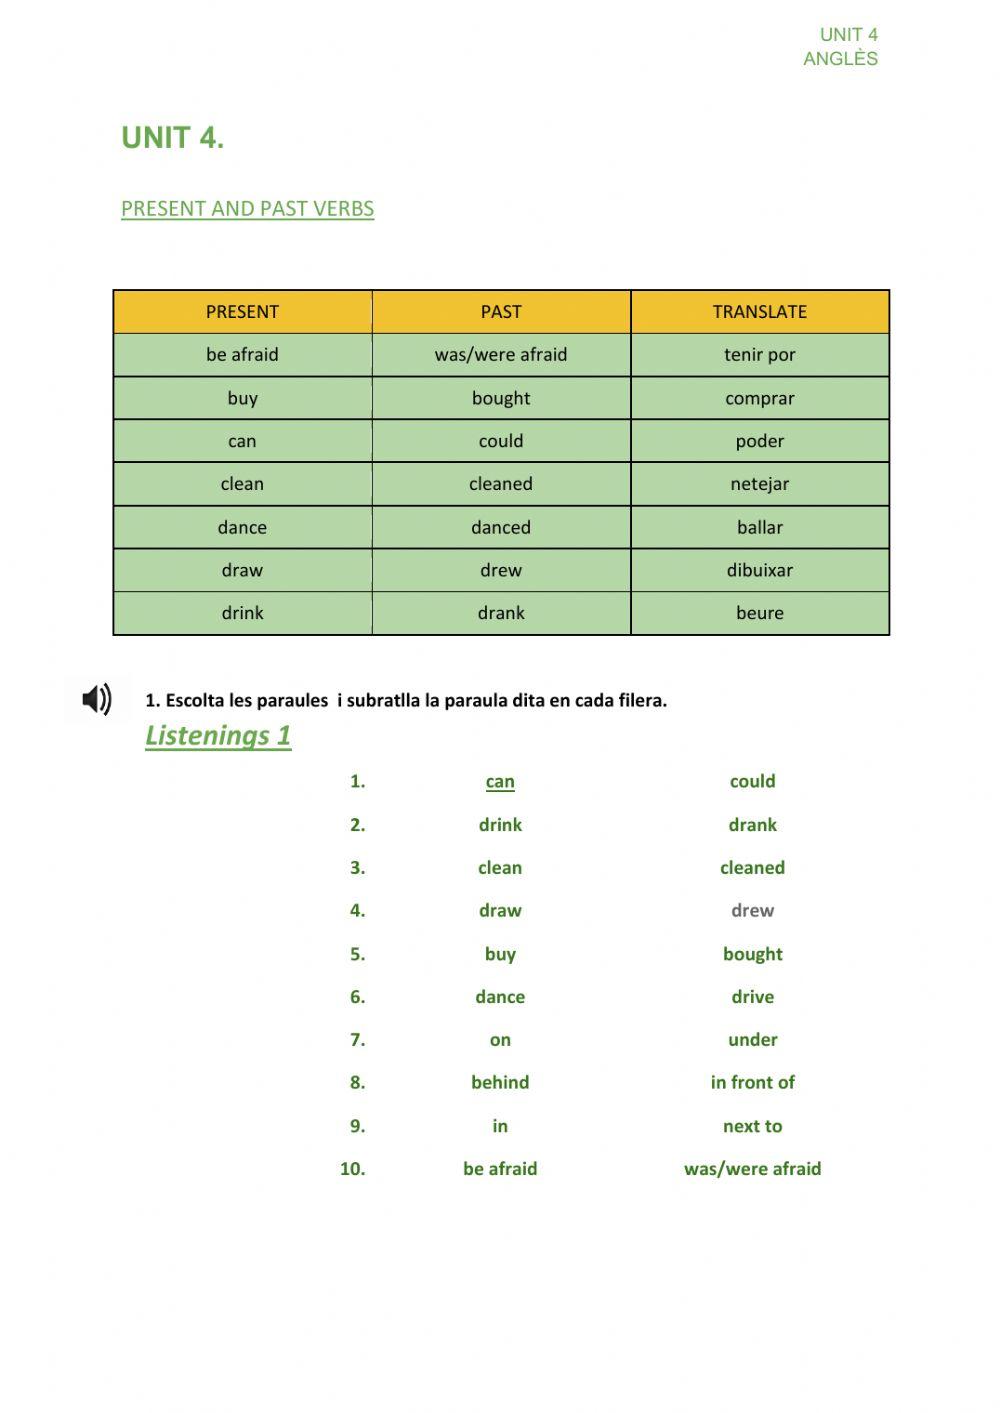 Present and past verbs